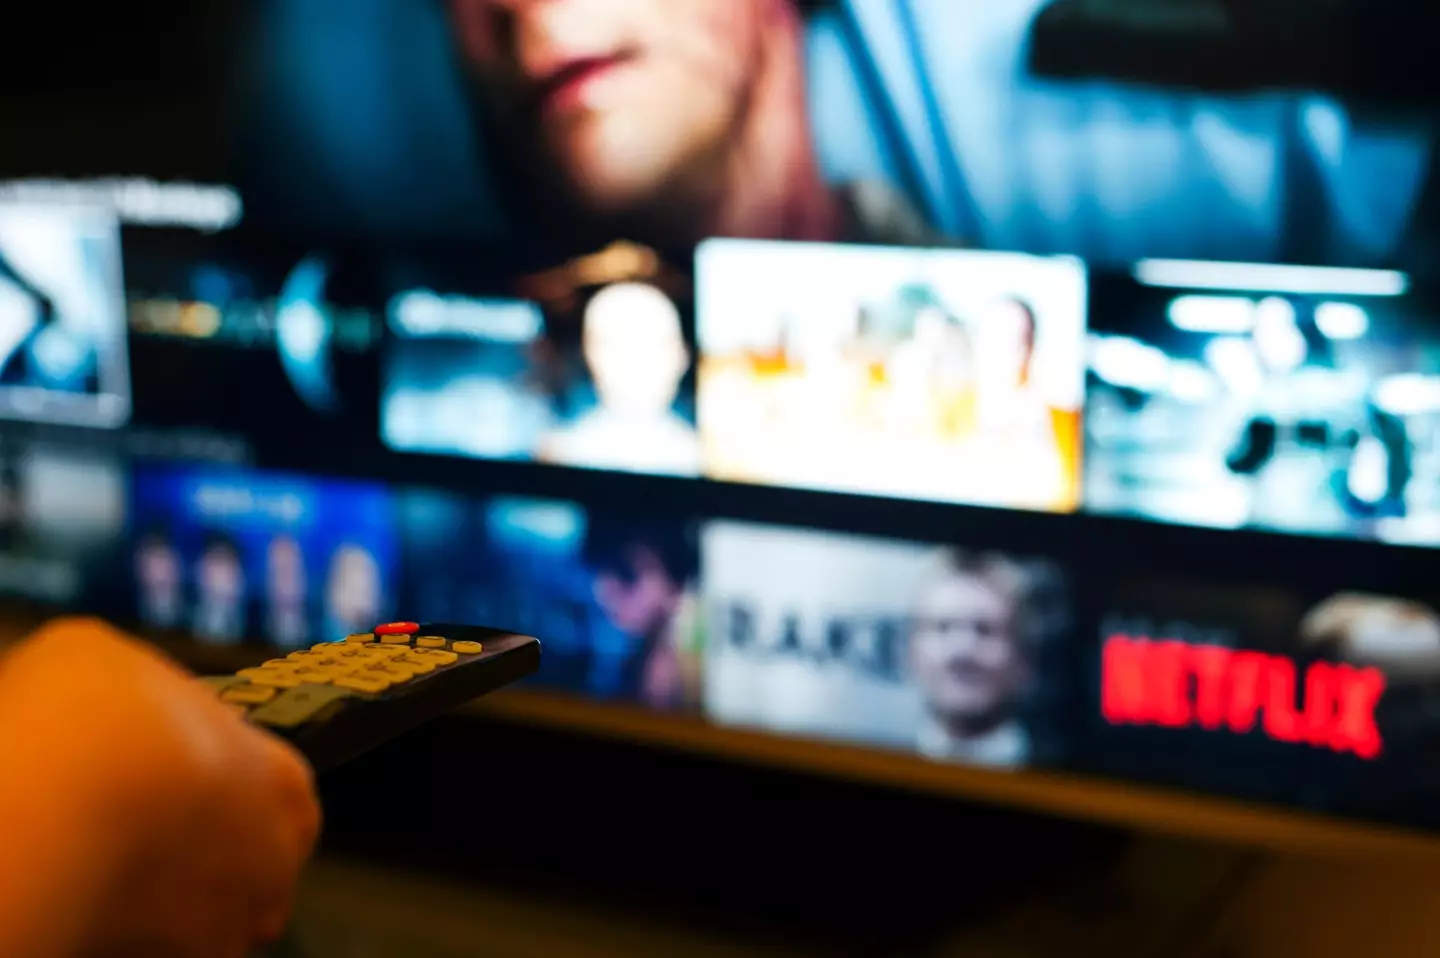 Netflix users will be able to transfer their profiles.